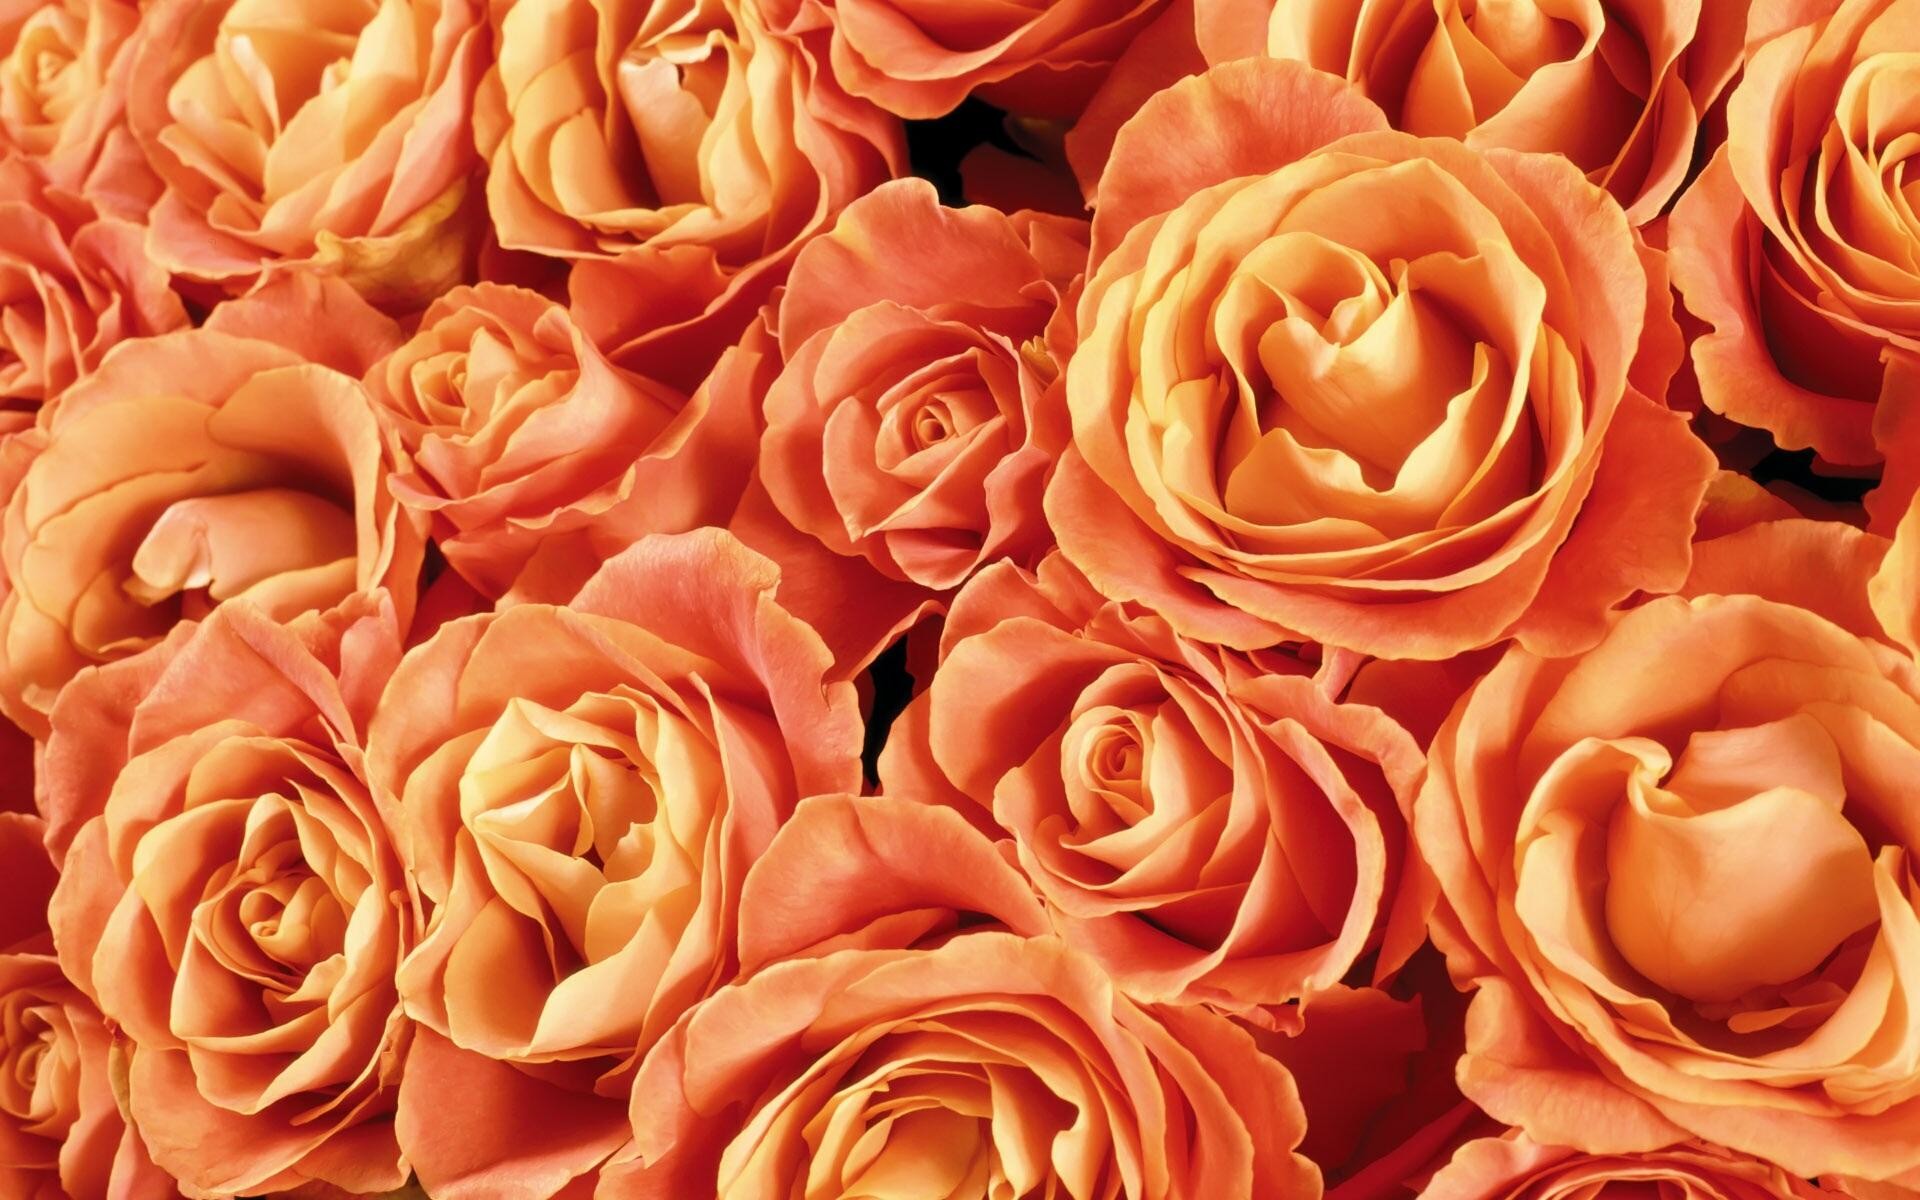 1920x1200 Orange Roses Backgrounds - Wallpaper, High Definition, High Quality .